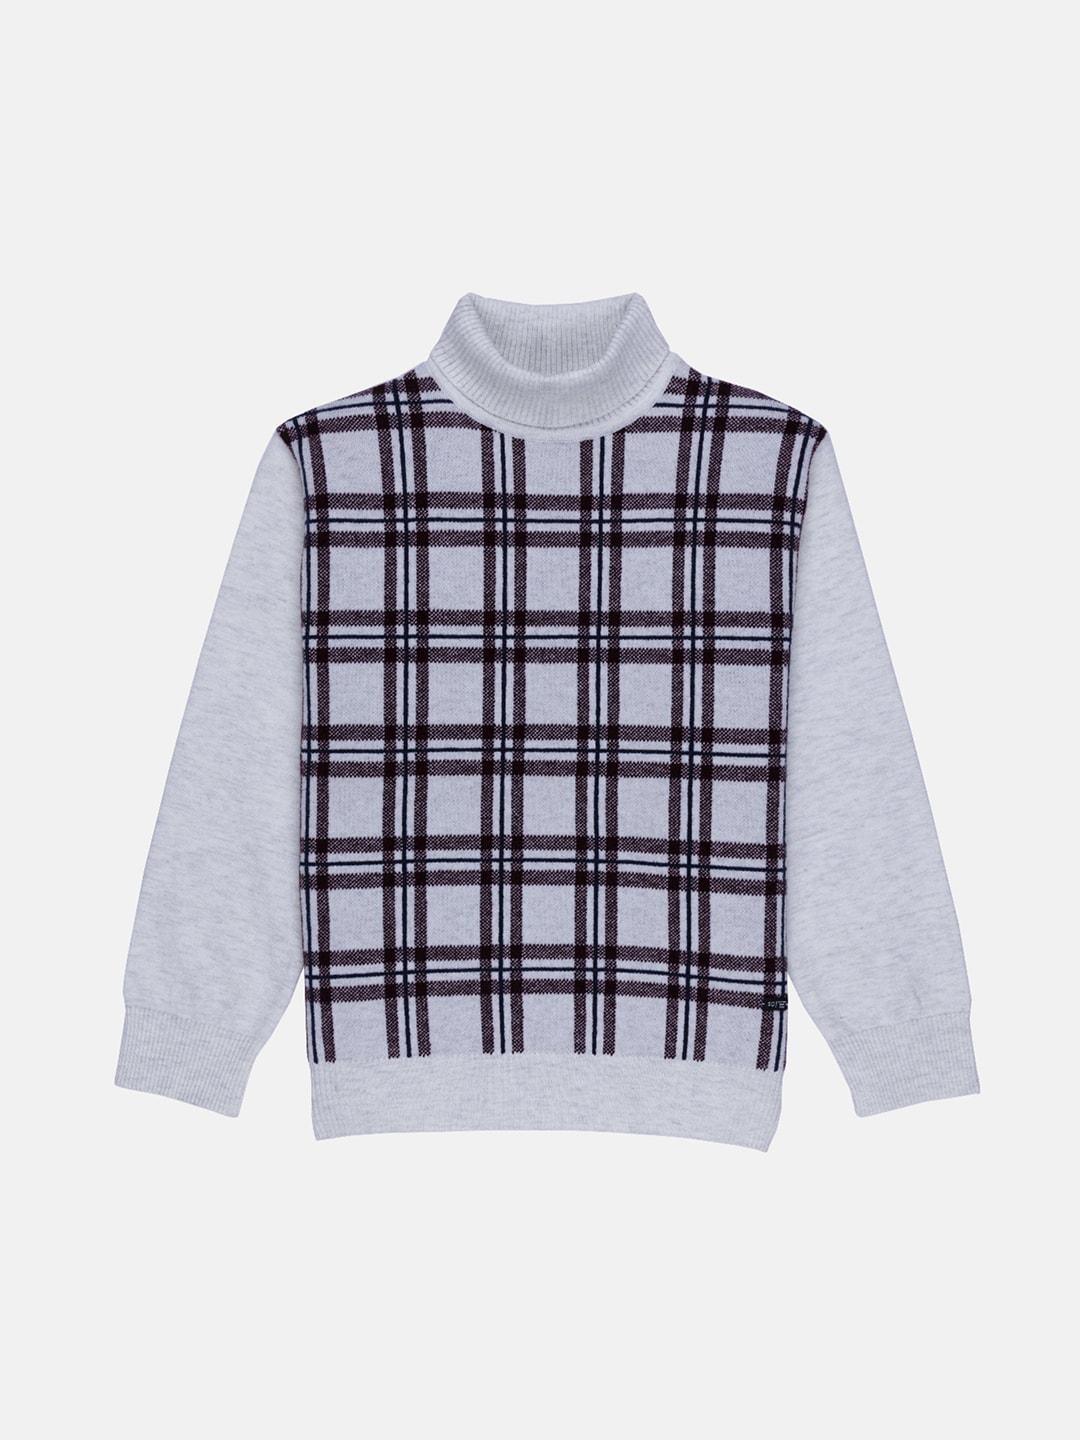 Status Quo Kids Boys Grey And Brown Checked Turtle Neck Pullover Sweater